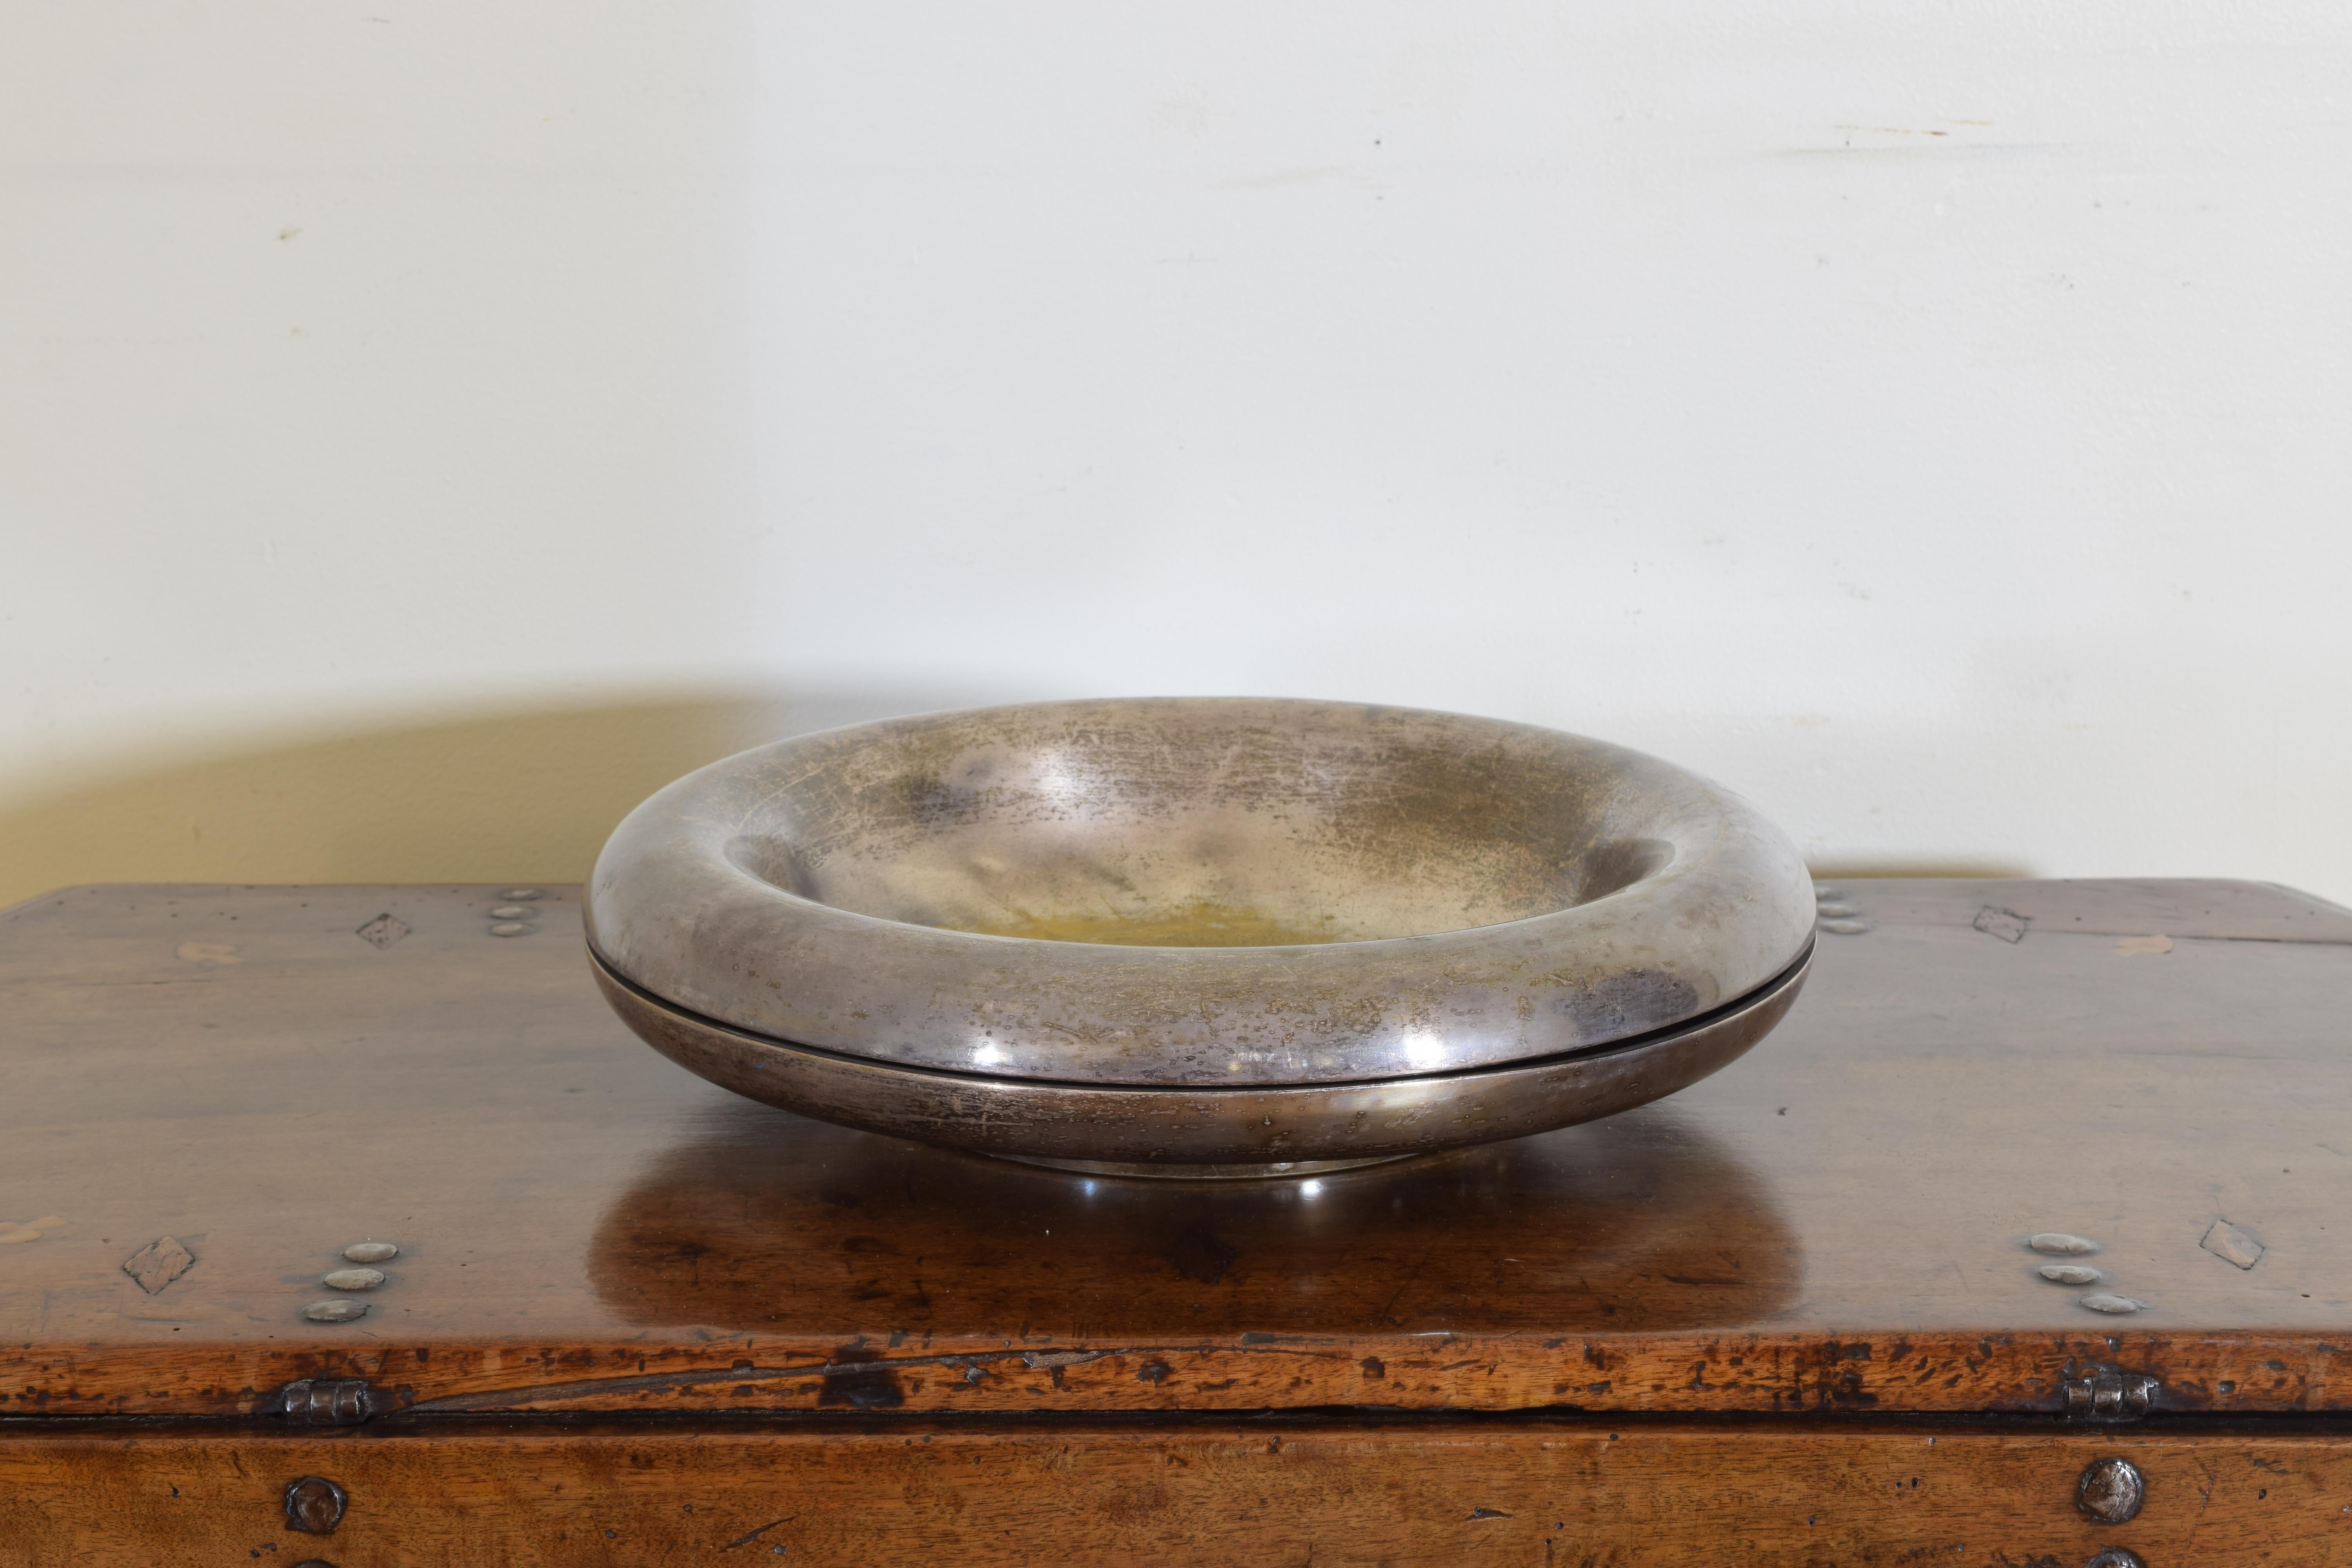 This silver centrepiece was designed by Franco Grignani in 1973. It features a deep bowl with at the center, the outer divided by a center gap. Signed and dated on the bottom.